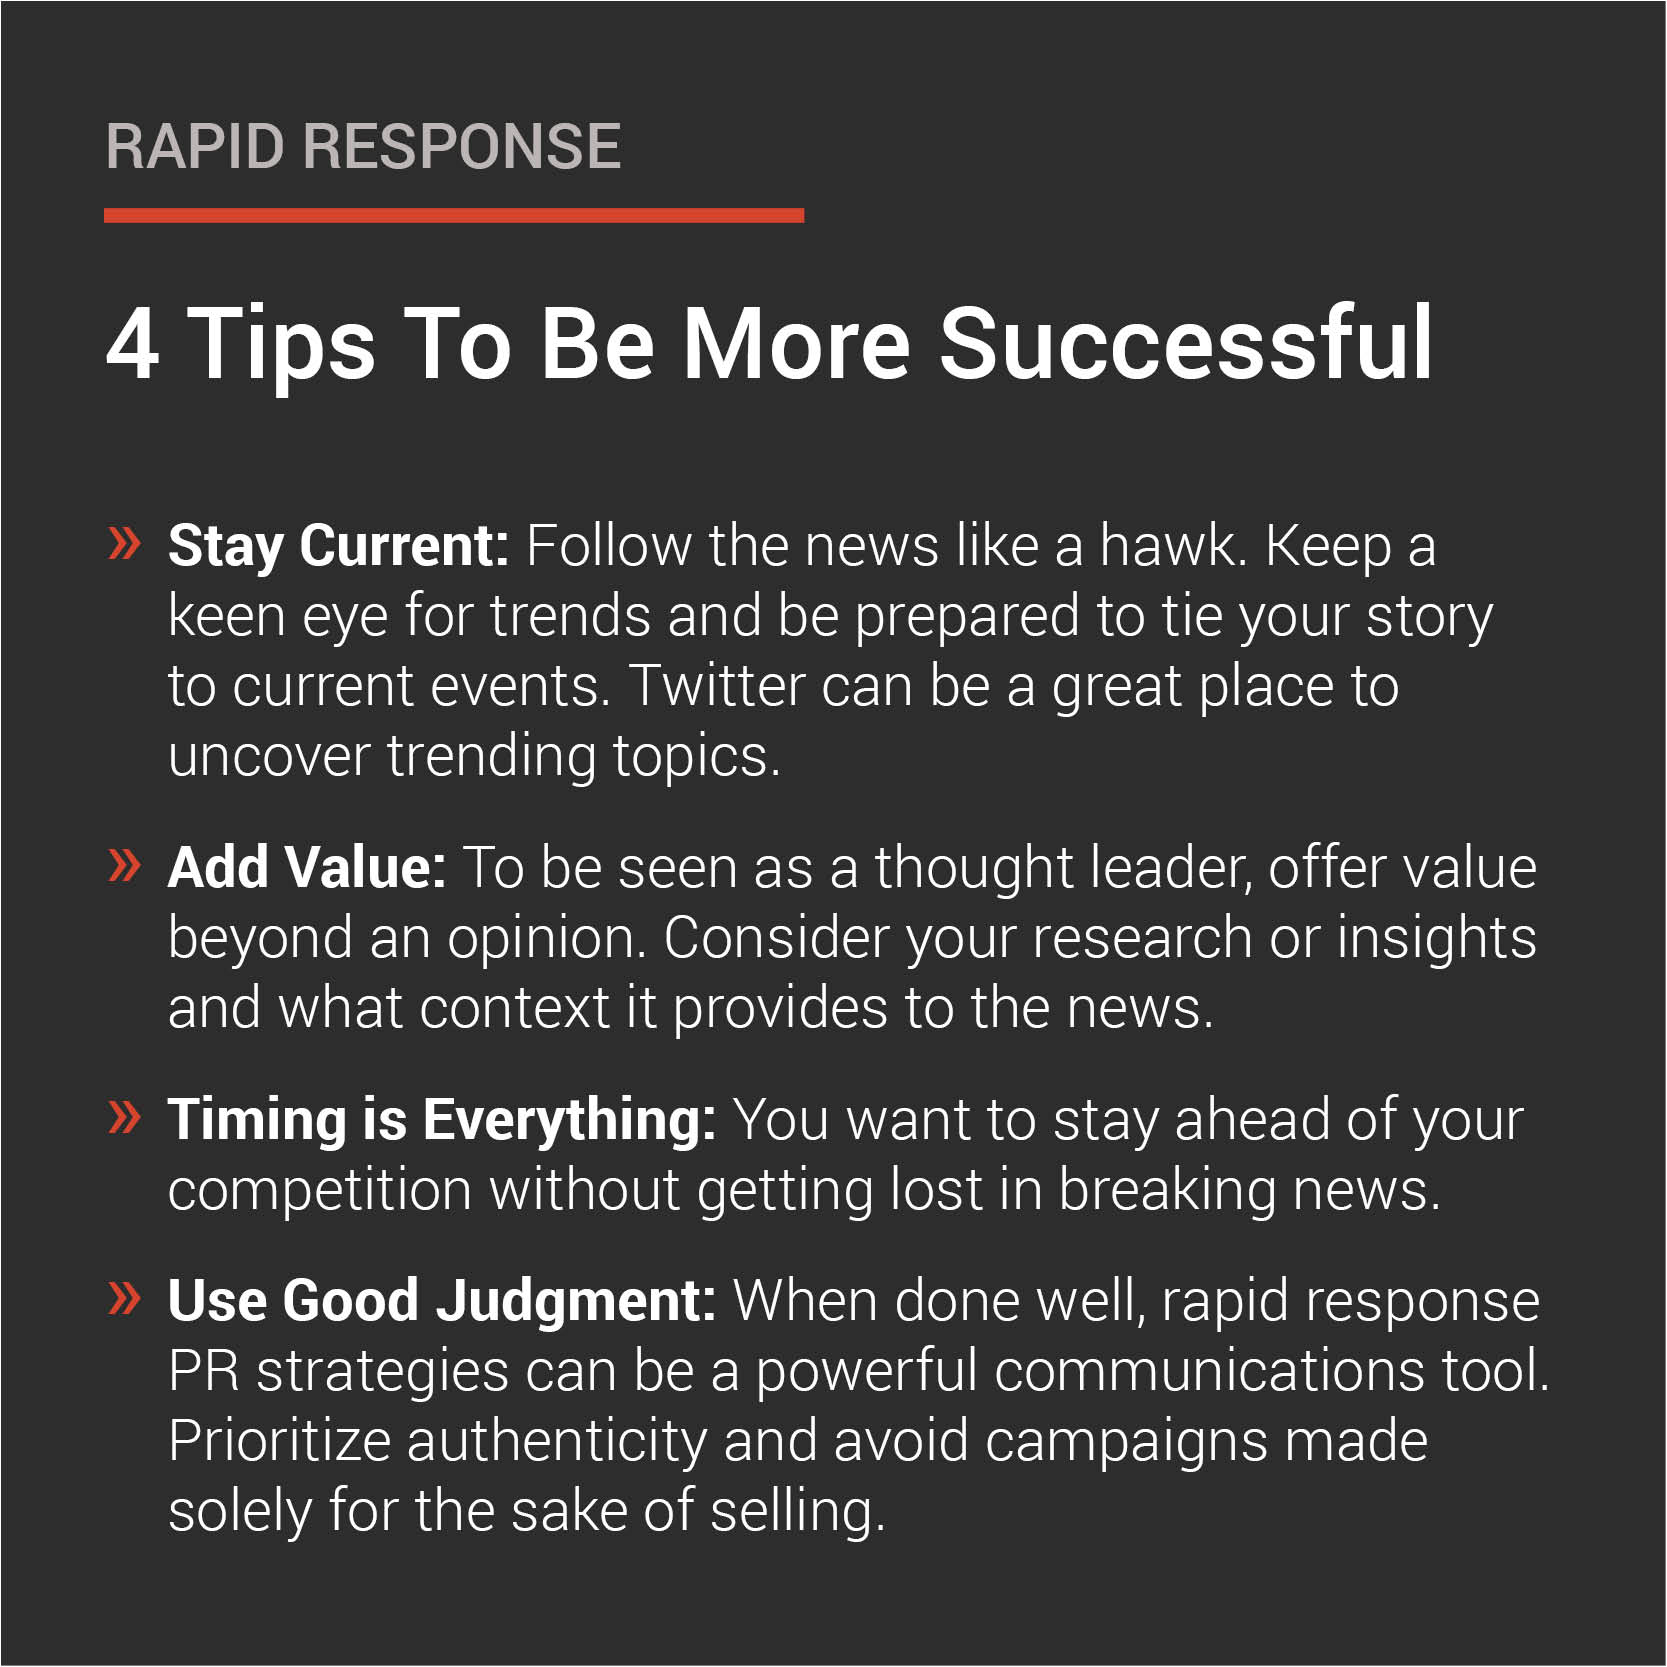 4 tips to be successful in your rapid response media strategy